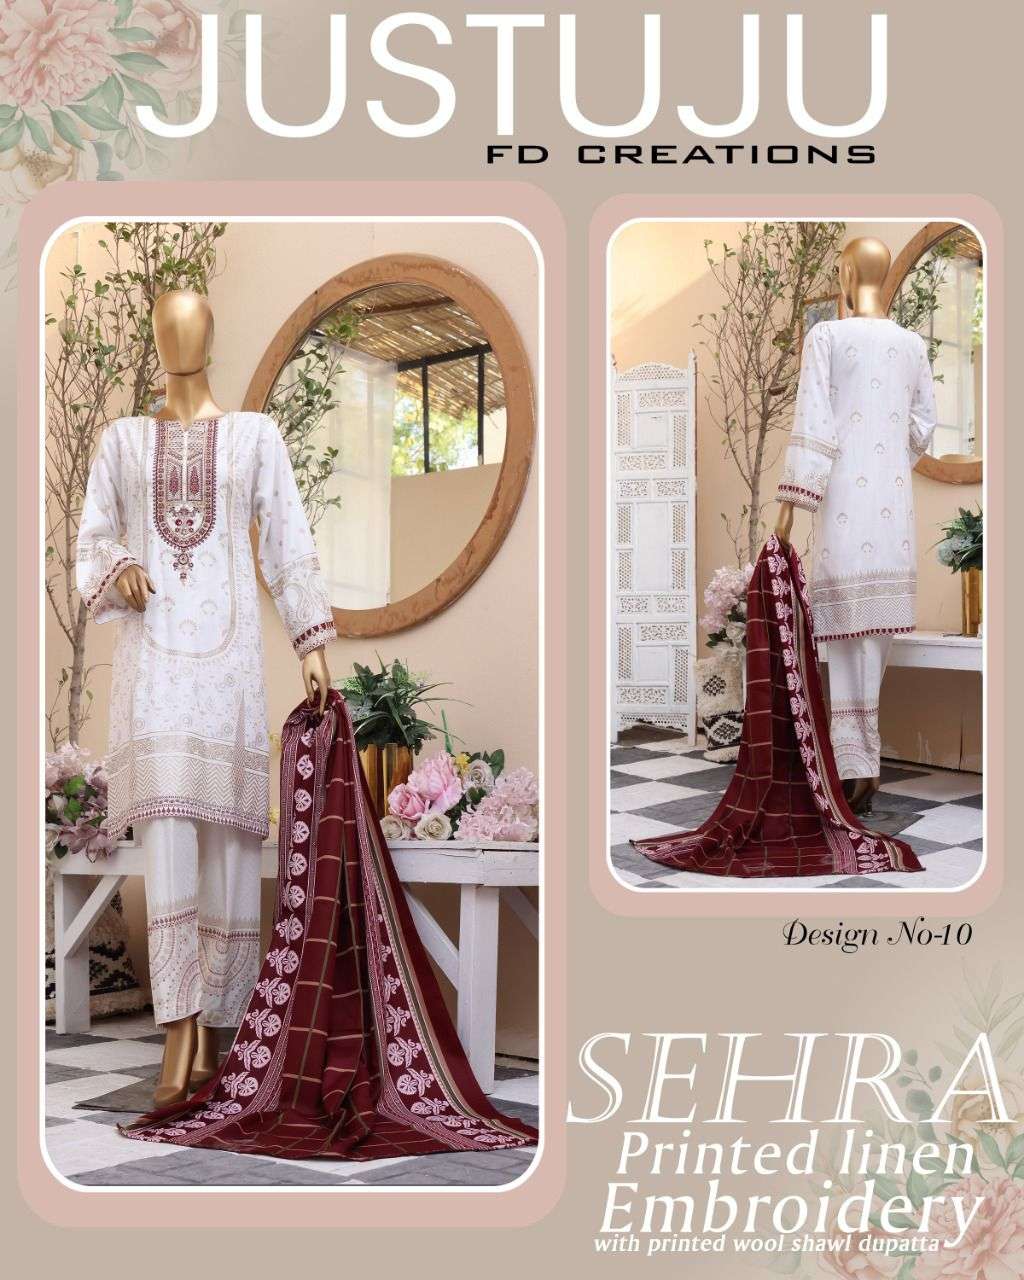 SEHRA WINTER BY FD CREATION 01 TO 12 SERIES BEAUTIFUL PAKISTANI SUITS COLORFUL STYLISH FANCY CASUAL WEAR & ETHNIC WEAR LINEN PRINT DRESSES AT WHOLESALE PRICE